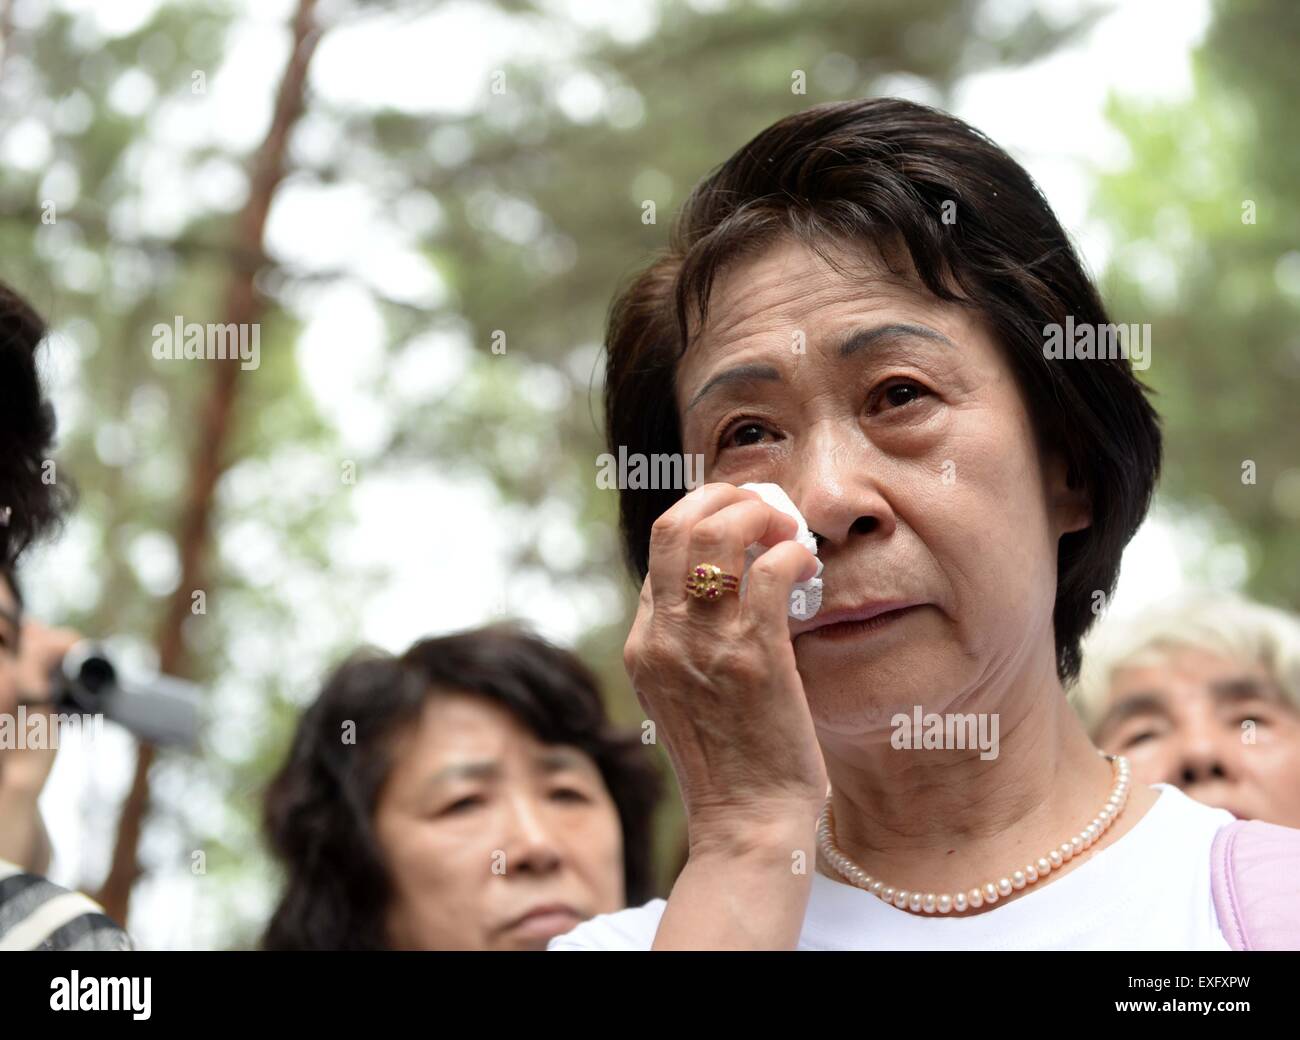 (150714) -- HARBIN, July 14, 2015 (Xinhua) -- Ikeda Sumie, director general of a Tokyo support group for those Japanese returned from China, weeps in front of a grave in a cemetery to memorize adoptive Chinese parents in Fangzheng County near Harbin, capital of northeast China's Heilongjiang Province, July 13, 2015. A group of 54 Japanese citizens, all now orphans, on Monday paid a visit to the graves of their adoptive Chinese parents here. Abandoned by their birth parents during the hasty retreat at the end of World War II in 1945, the orphans, now over 70 years old, were taken in and raised Stock Photo